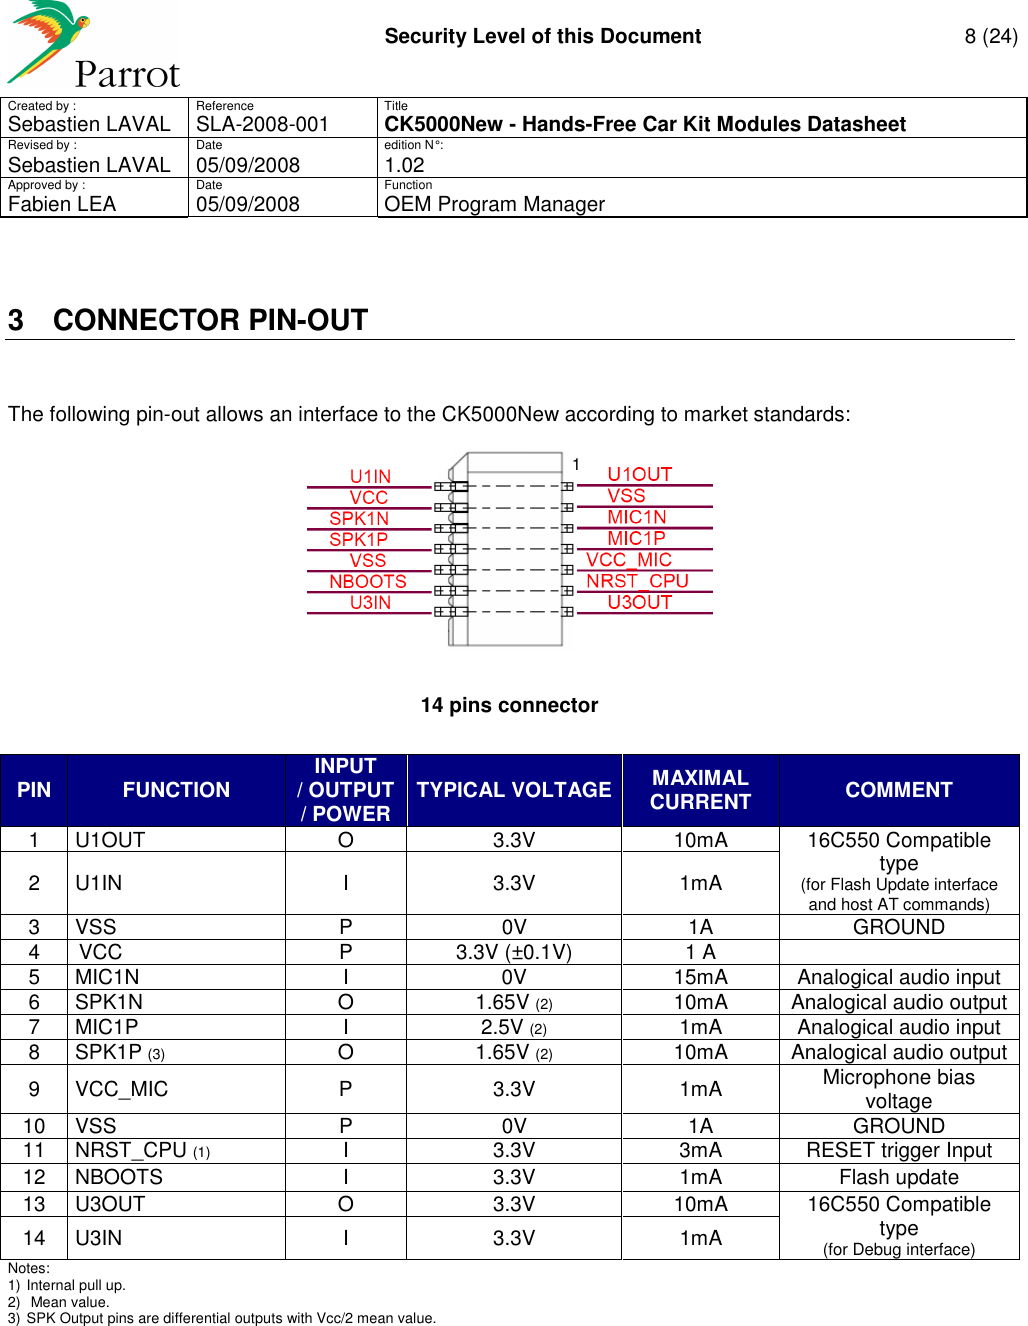     Security Level of this Document  8 (24) Created by :  Reference  Title Sebastien LAVAL   SLA-2008-001 CK5000New - Hands-Free Car Kit Modules Datasheet Revised by :  Date  edition N° : Sebastien LAVAL  05/09/2008  1.02 Approved by :  Date  Function     Fabien LEA  05/09/2008  OEM Program Manager   3  CONNECTOR PIN-OUT  The following pin-out allows an interface to the CK5000New according to market standards:        14 pins connector  PIN  FUNCTION INPUT / OUTPUT / POWER  TYPICAL VOLTAGE MAXIMAL CURRENT  COMMENT 1  U1OUT  O  3.3V  10mA  16C550 Compatible type (for Flash Update interface and host AT commands) 2  U1IN  I  3.3V  1mA 3  VSS   P  0V  1A  GROUND 4  VCC   P  3.3V (±0.1V)  1 A   5  MIC1N  I  0V  15mA  Analogical audio input 6  SPK1N   O  1.65V (2)  10mA  Analogical audio output 7  MIC1P   I  2.5V (2)  1mA  Analogical audio input 8  SPK1P (3)  O  1.65V (2)  10mA  Analogical audio output 9  VCC_MIC  P  3.3V  1mA  Microphone bias voltage 10  VSS   P  0V  1A  GROUND 11  NRST_CPU (1)  I  3.3V  3mA  RESET trigger Input 12  NBOOTS  I  3.3V  1mA  Flash update 13  U3OUT  O  3.3V  10mA  16C550 Compatible type  (for Debug interface) 14  U3IN  I  3.3V  1mA Notes:   1) Internal pull up. 2)  Mean value. 3) SPK Output pins are differential outputs with Vcc/2 mean value.  1 